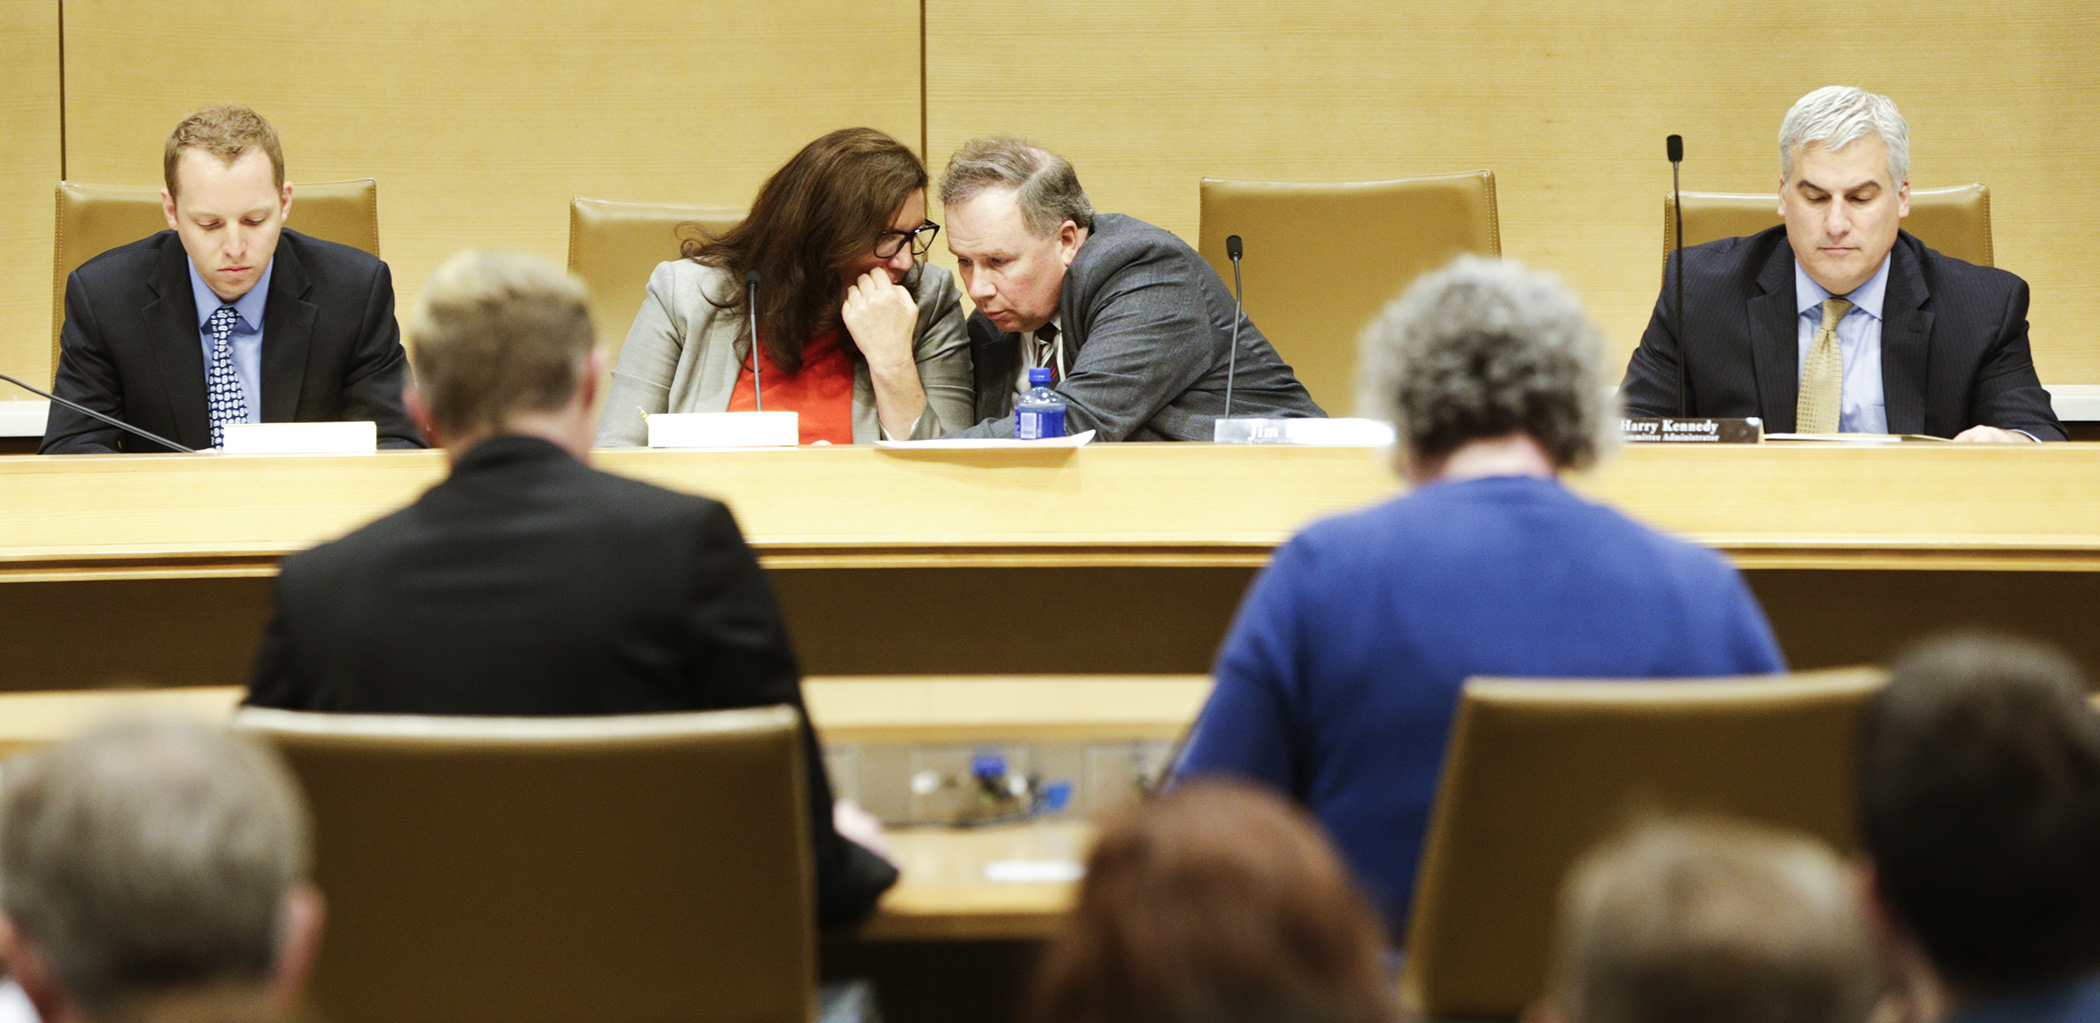 Sen. Julie Rosen and Rep. Jim Knoblach, co-chairs of the supplemental budget conference committee, confer May 8 as staff begins and overview of the House and Senate bills. Photo by Paul Battaglia